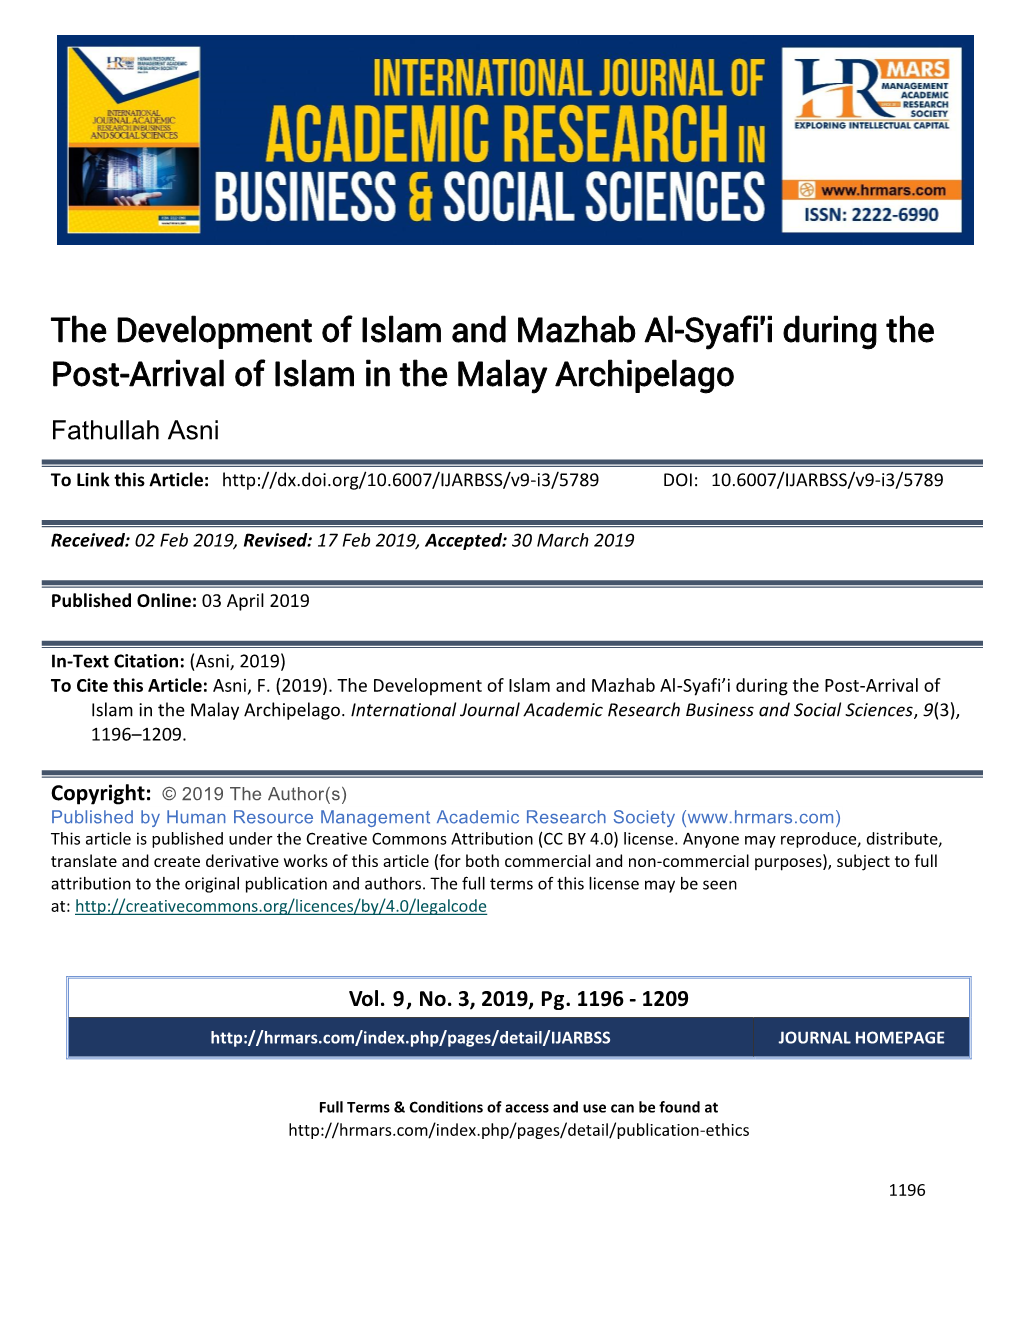 The Development of Islam and Mazhab Al-Syafi'i During the Post-Arrival of Islam in the Malay Archipelago